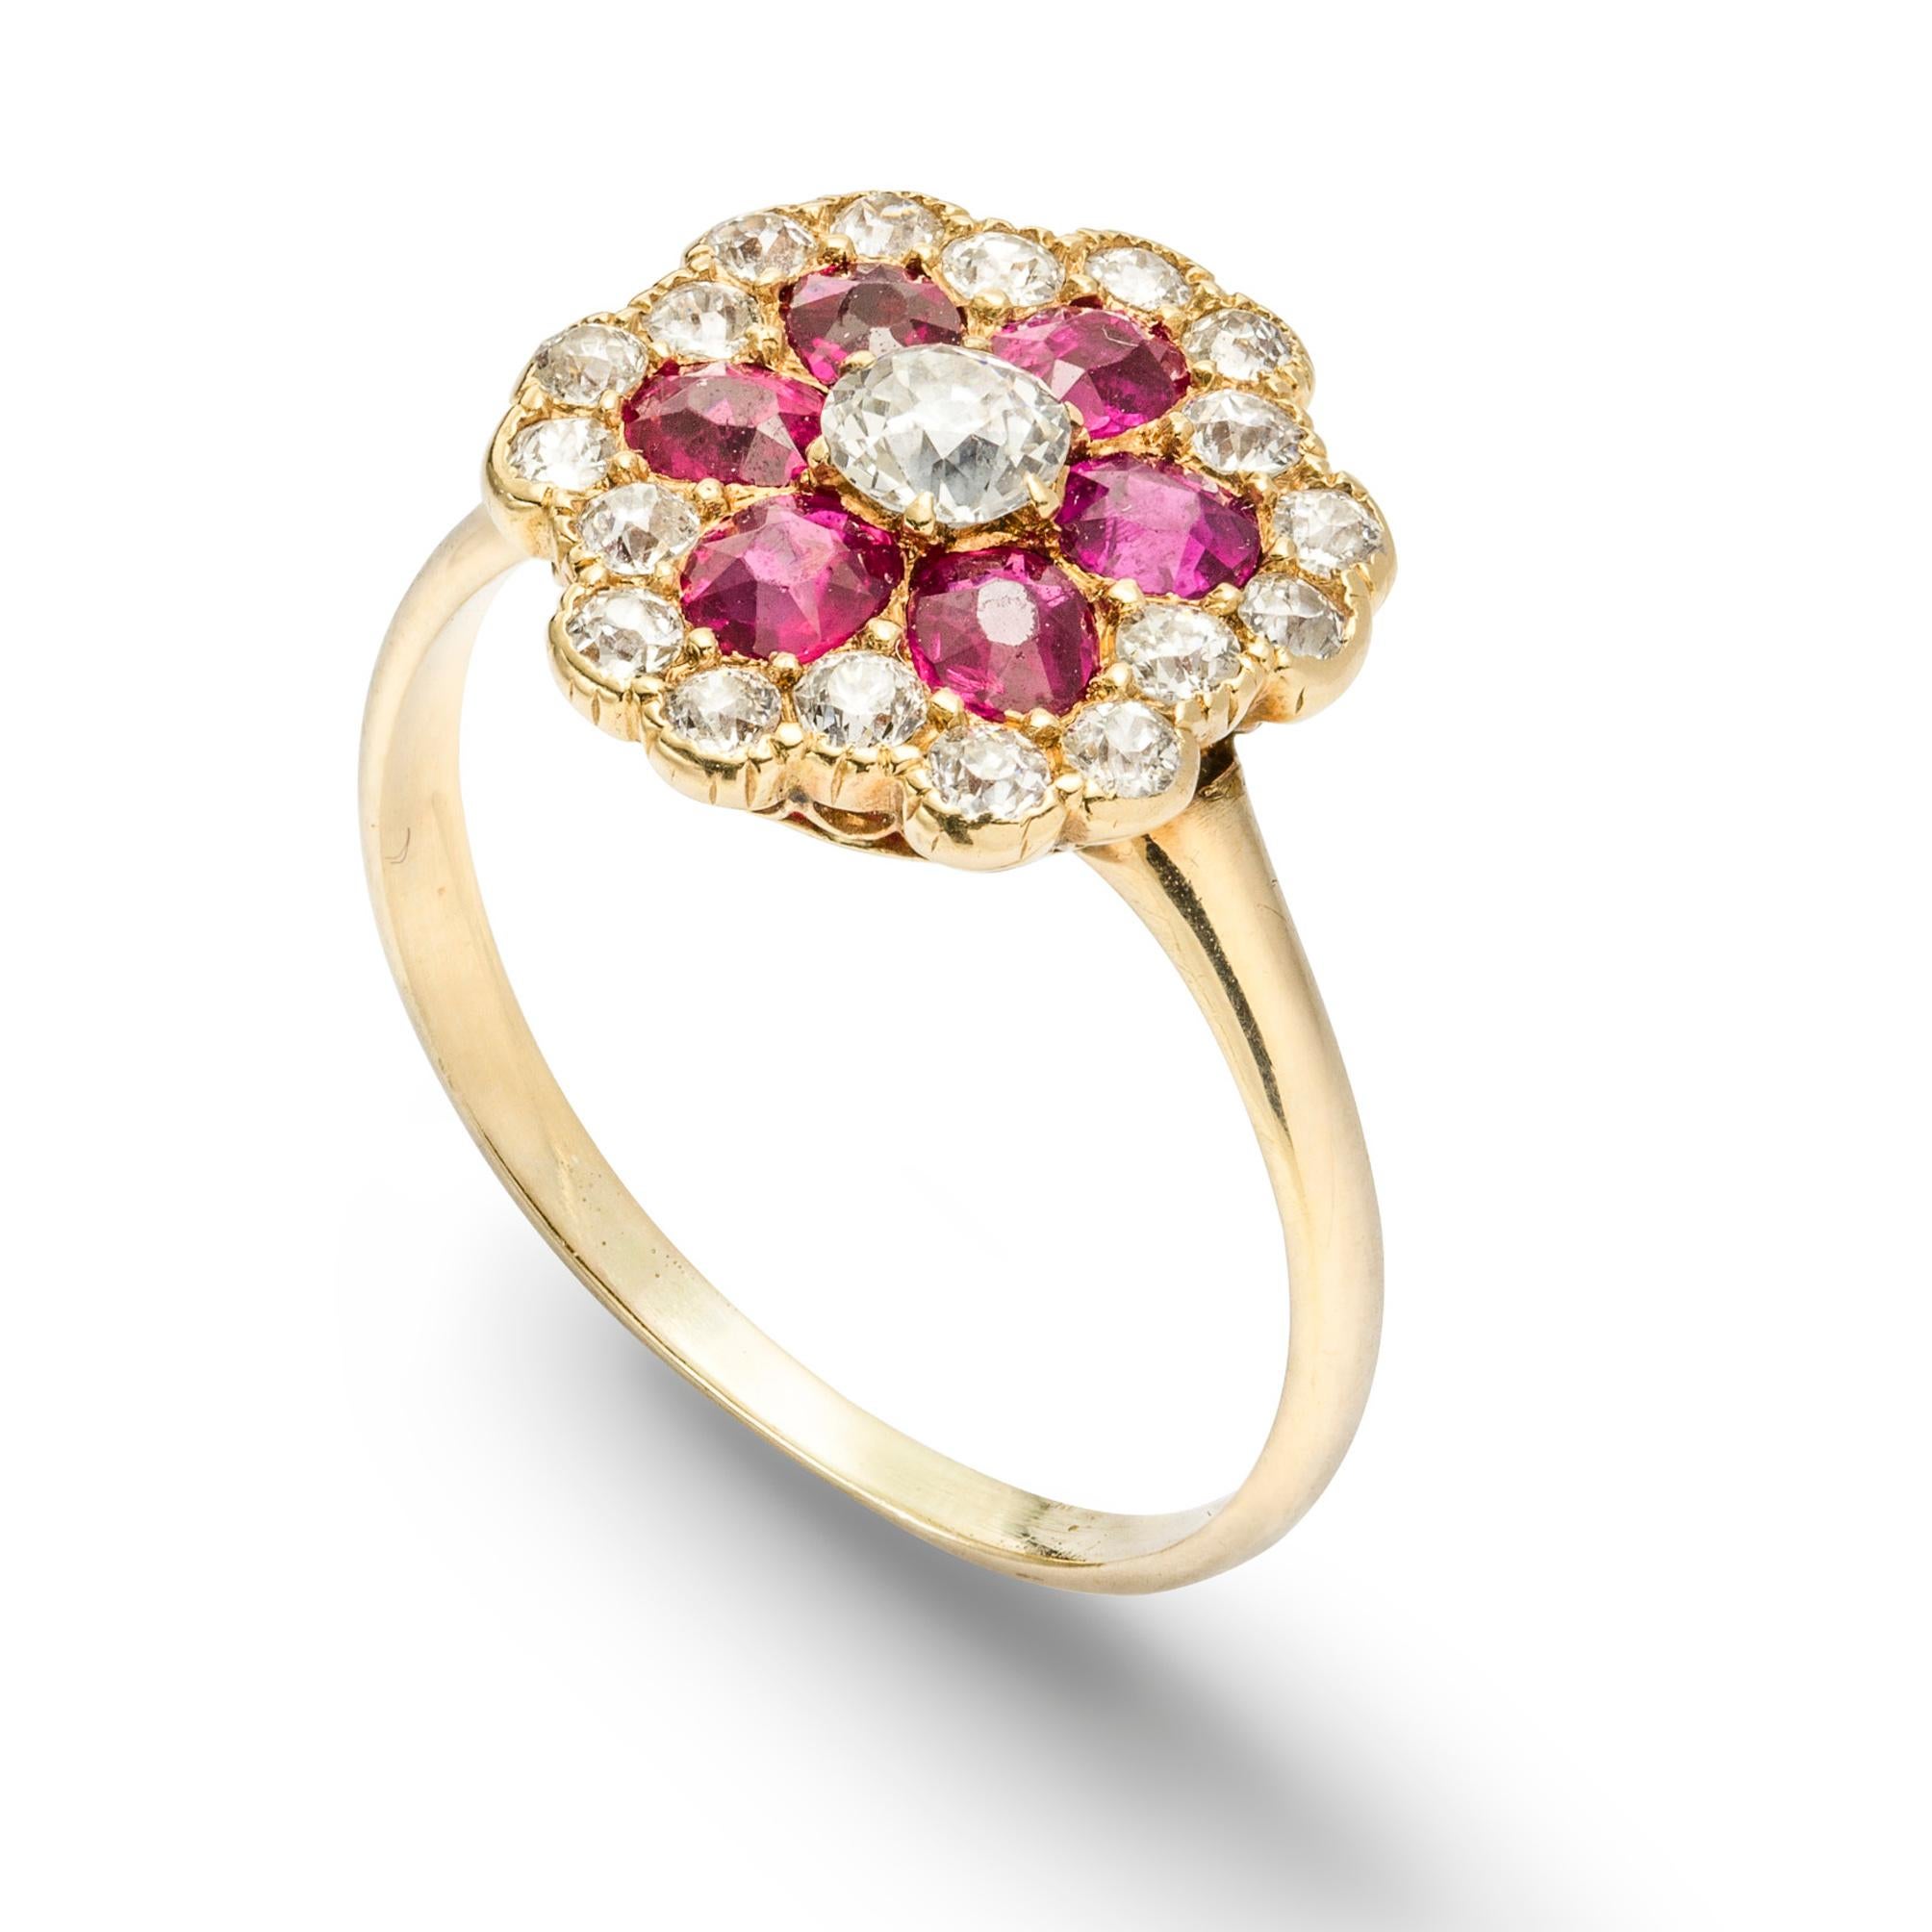 A ruby and diamond floral cluster ring, the central round brilliant-cut diamond, estimated to weigh 0.15 carats, surrounded by six oval faceted rubies, estimated to weigh a total of 0.6 carats, to a border of round brilliant-cut diamonds, estimated